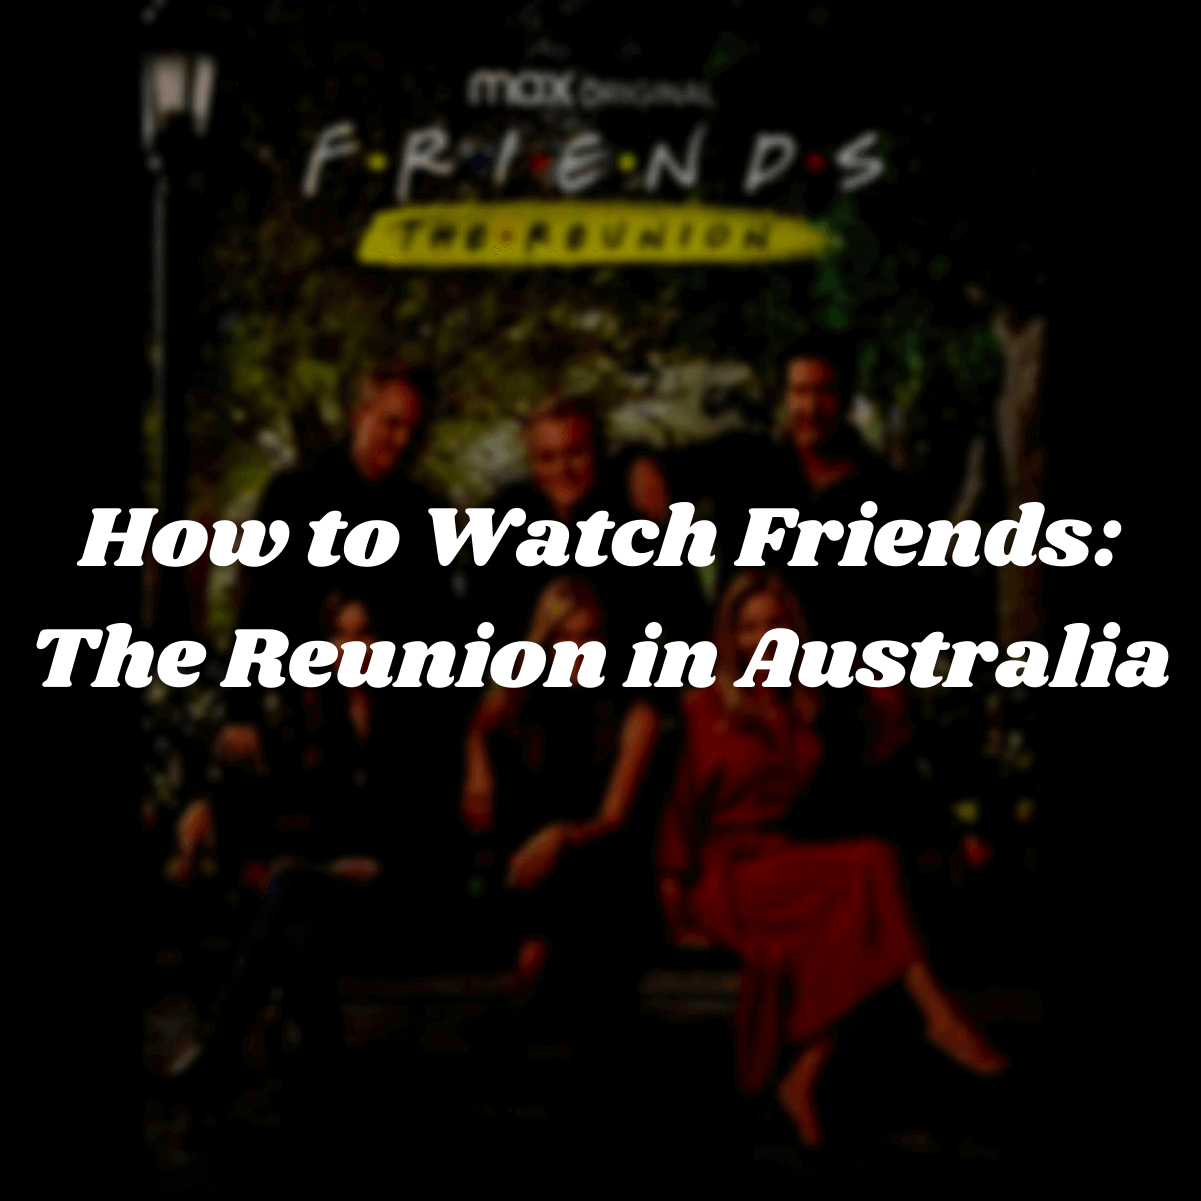 How to Watch Friends: The Reunion in Australia [Easy Guide]